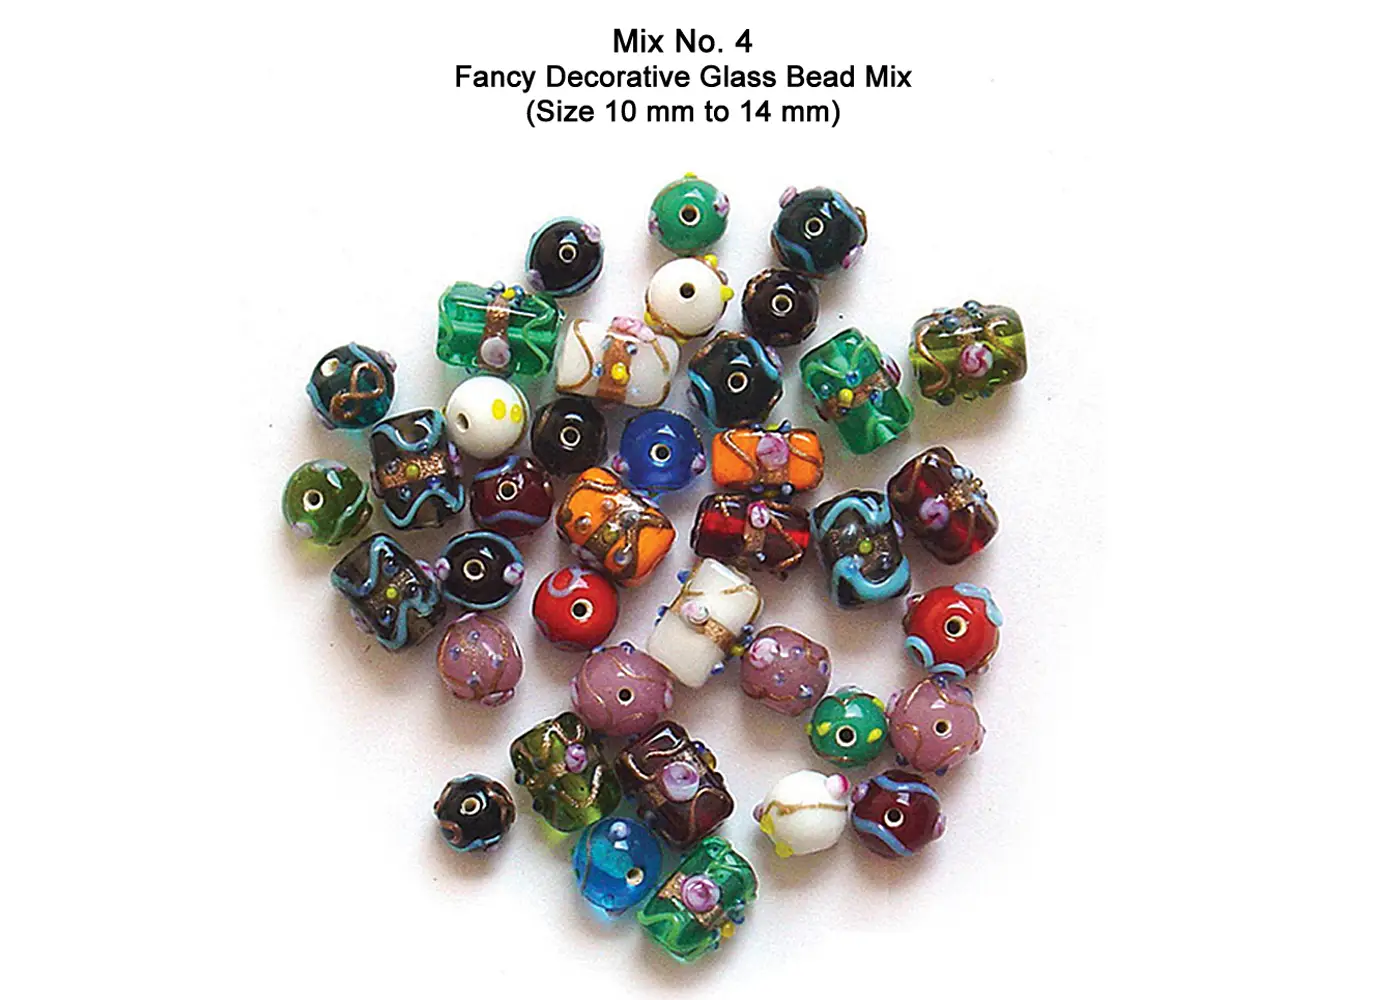 Fancy Decorative Glass Beads Mix Size 10 mm to 14 mm